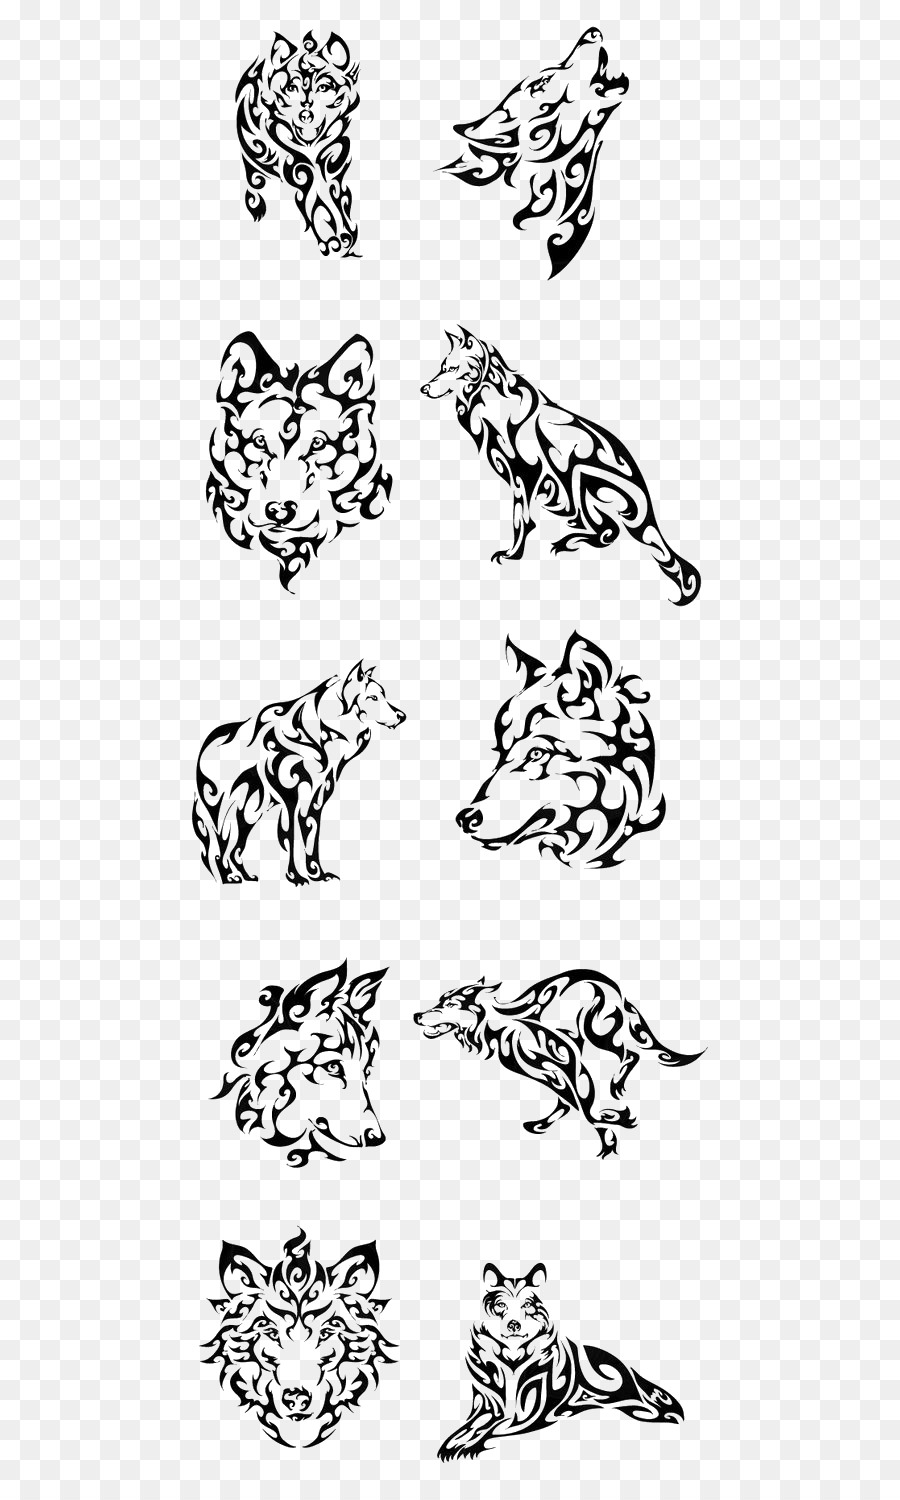 Comanche Tattoo Tribe Symbol Native Americans in the United States - Cartoon wolf png download - 564*1490 - Free Transparent Comanche png Download.